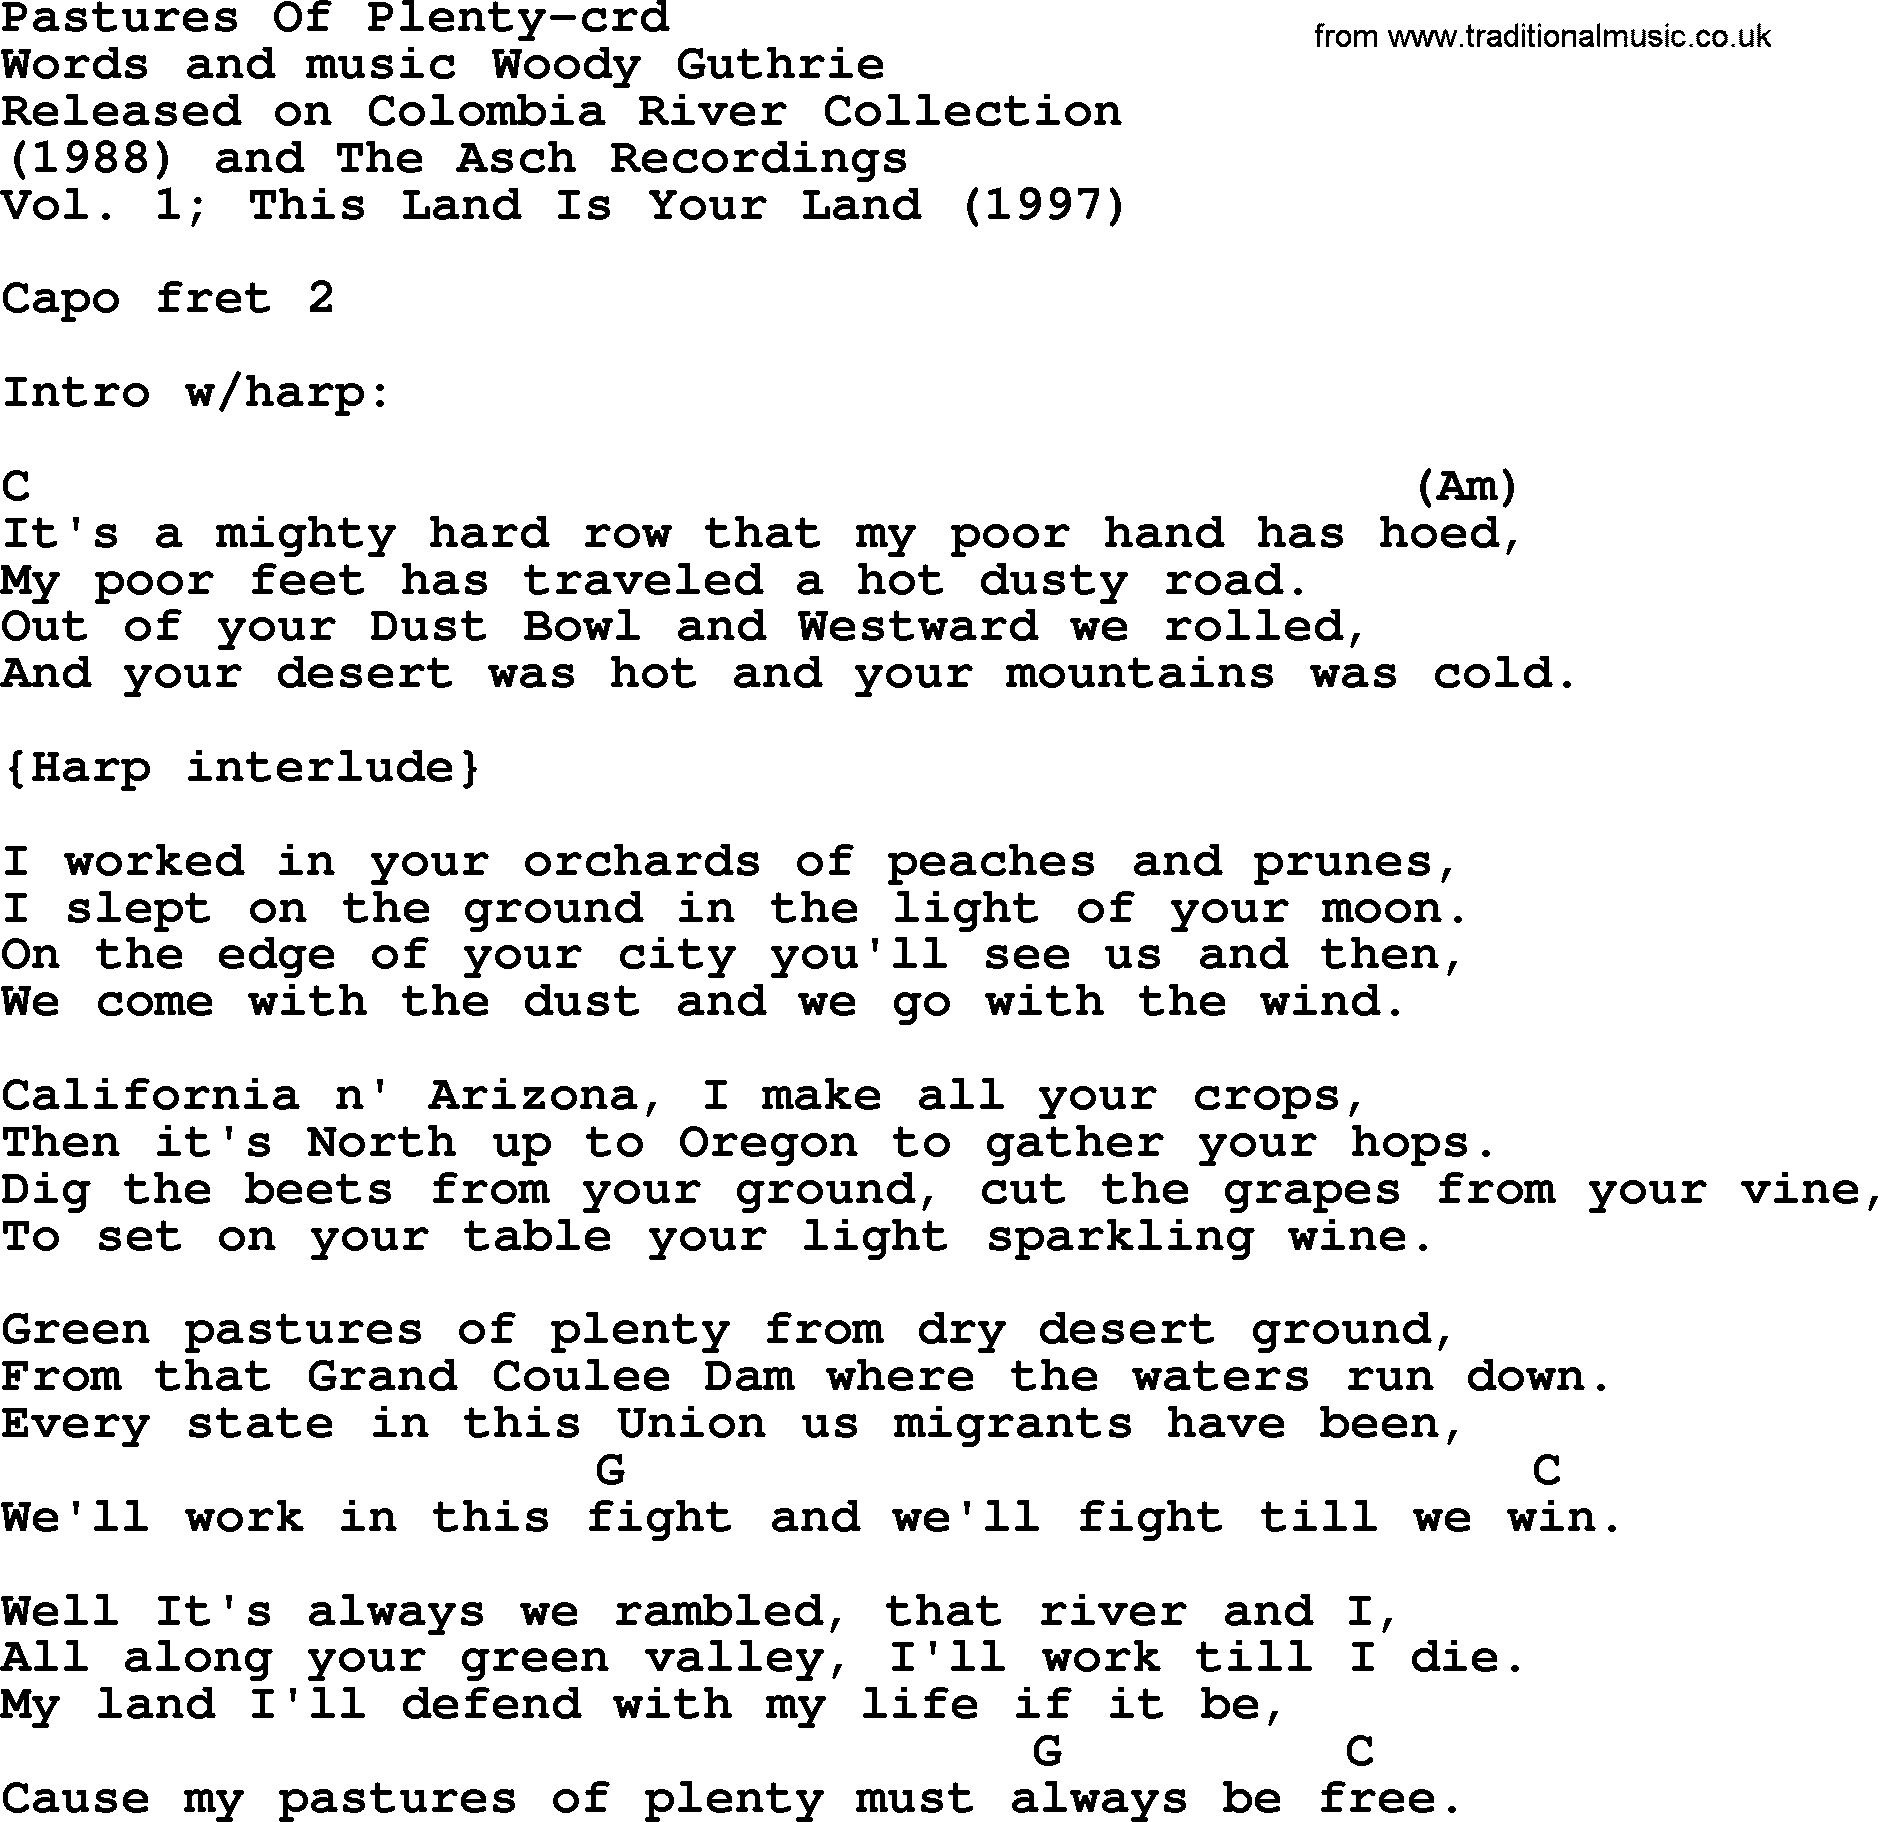 Woody Guthrie song Pastures Of Plenty lyrics and chords